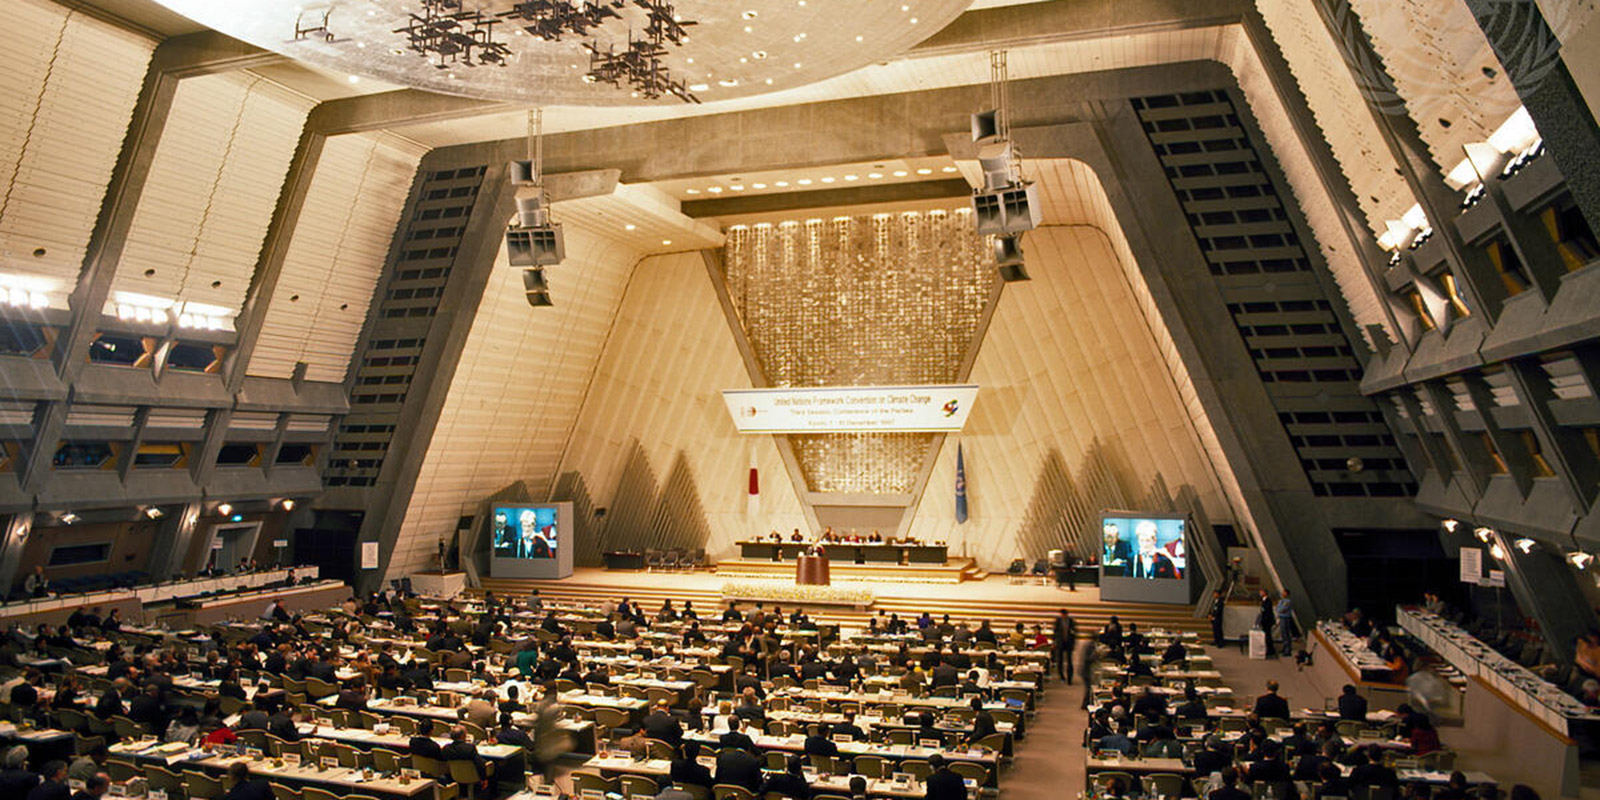 The 1997 UN climate change conference in Kyoto | UN Photo/Frank Leather